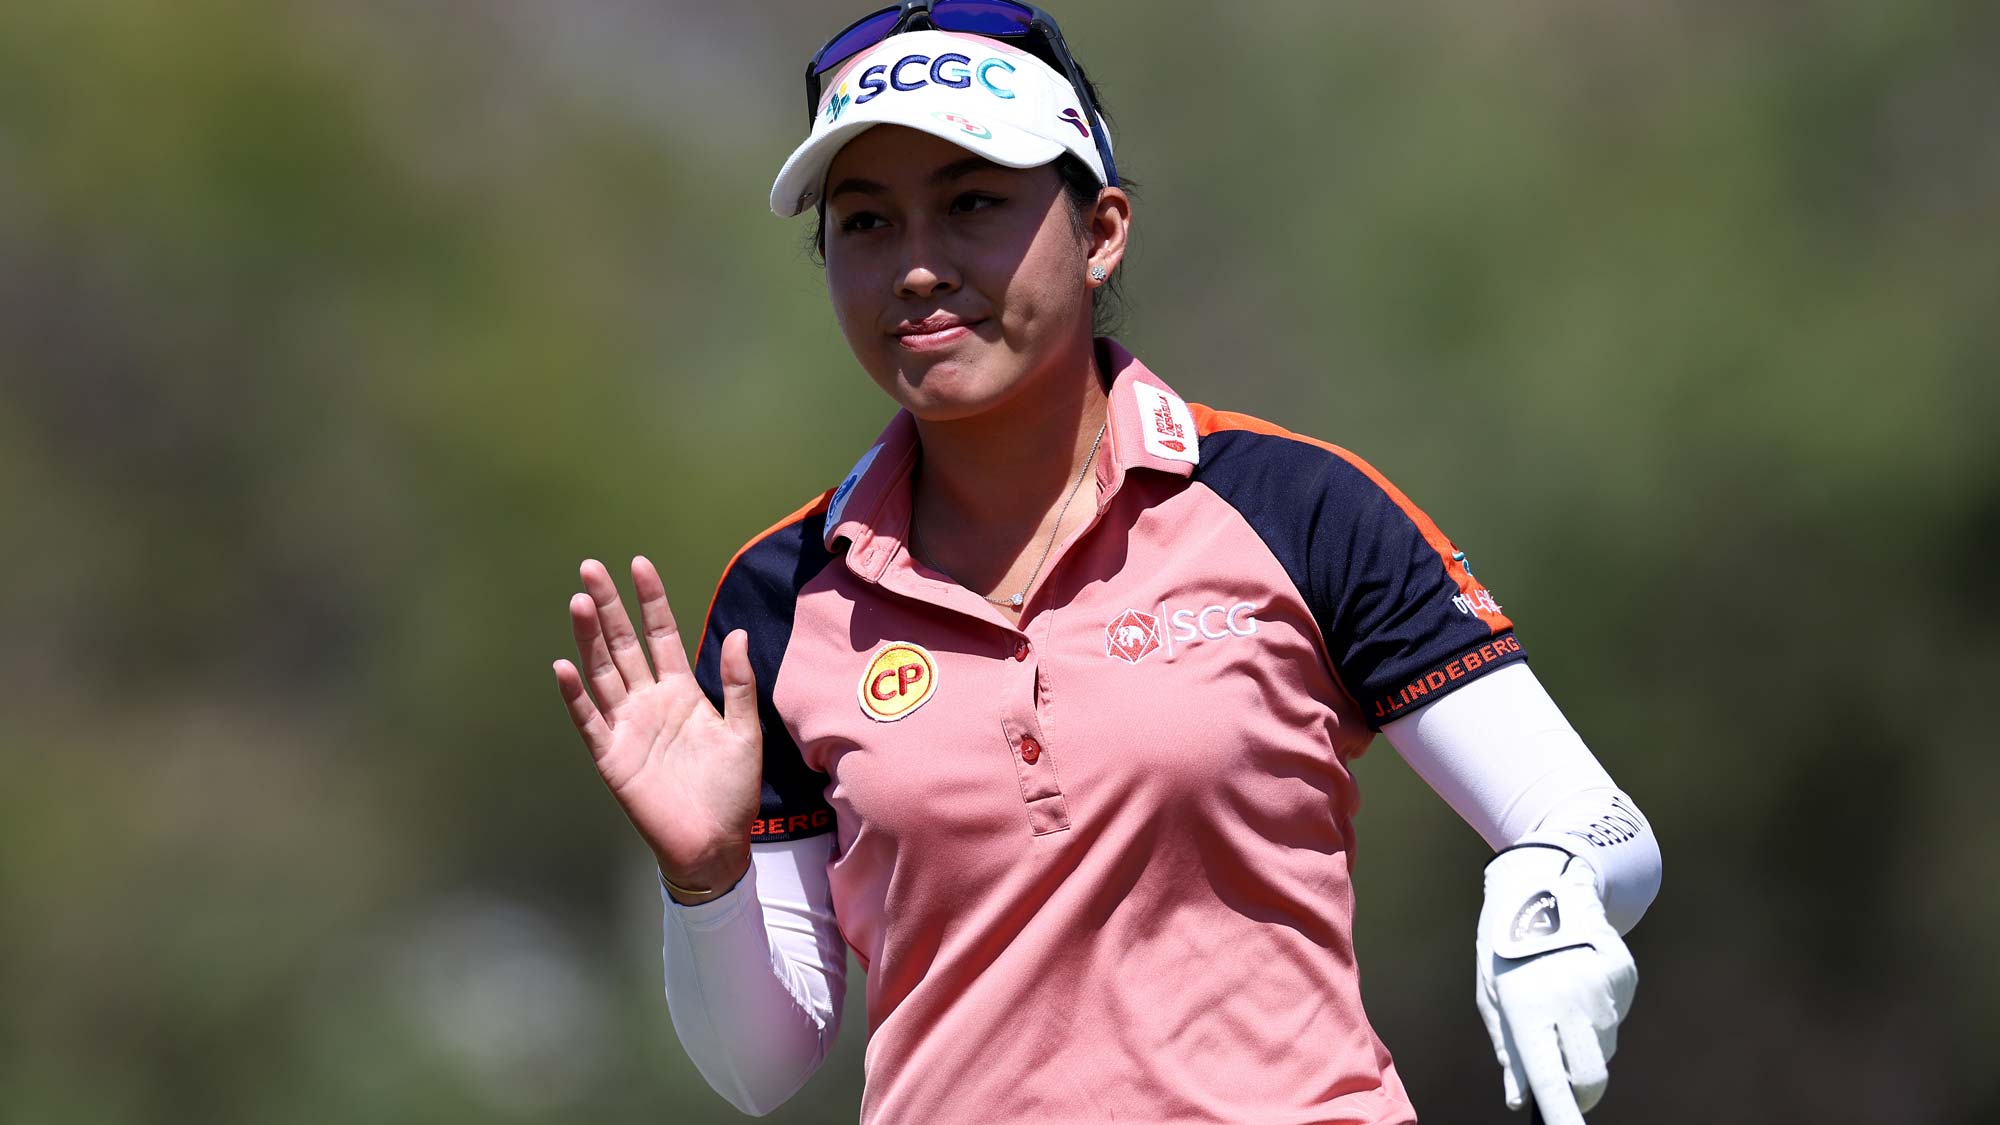 Atthaya Thitikul of Thailand waves to the gallery before playing a shot off the 10th tee during the first round of The Ascendant LPGA benefiting Volunteers of America